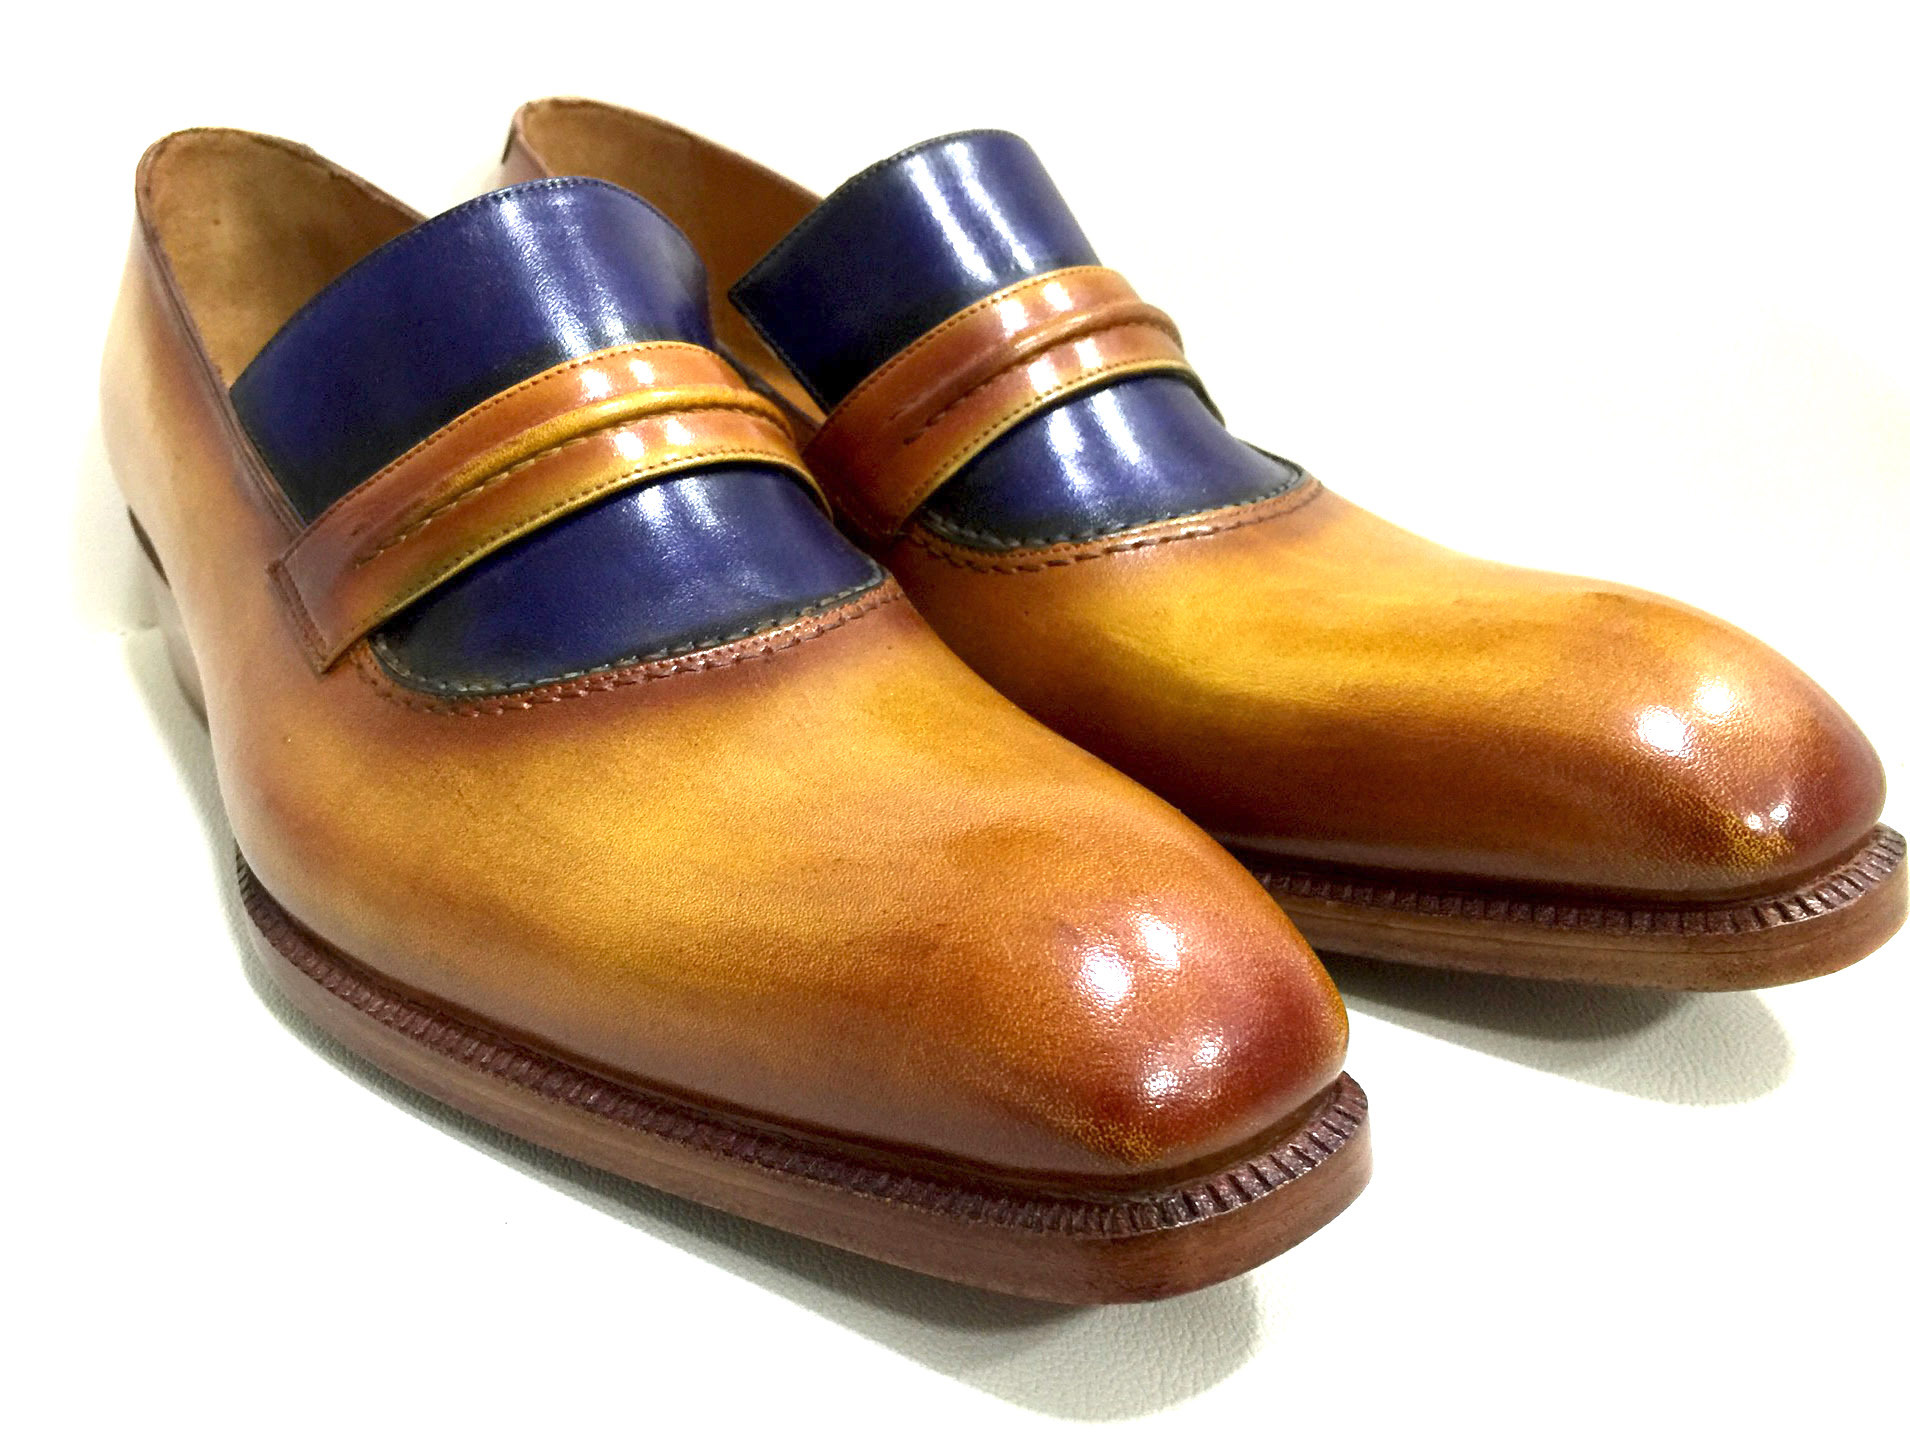 Classic Handmade Shoes (Derry Street) St James Sole